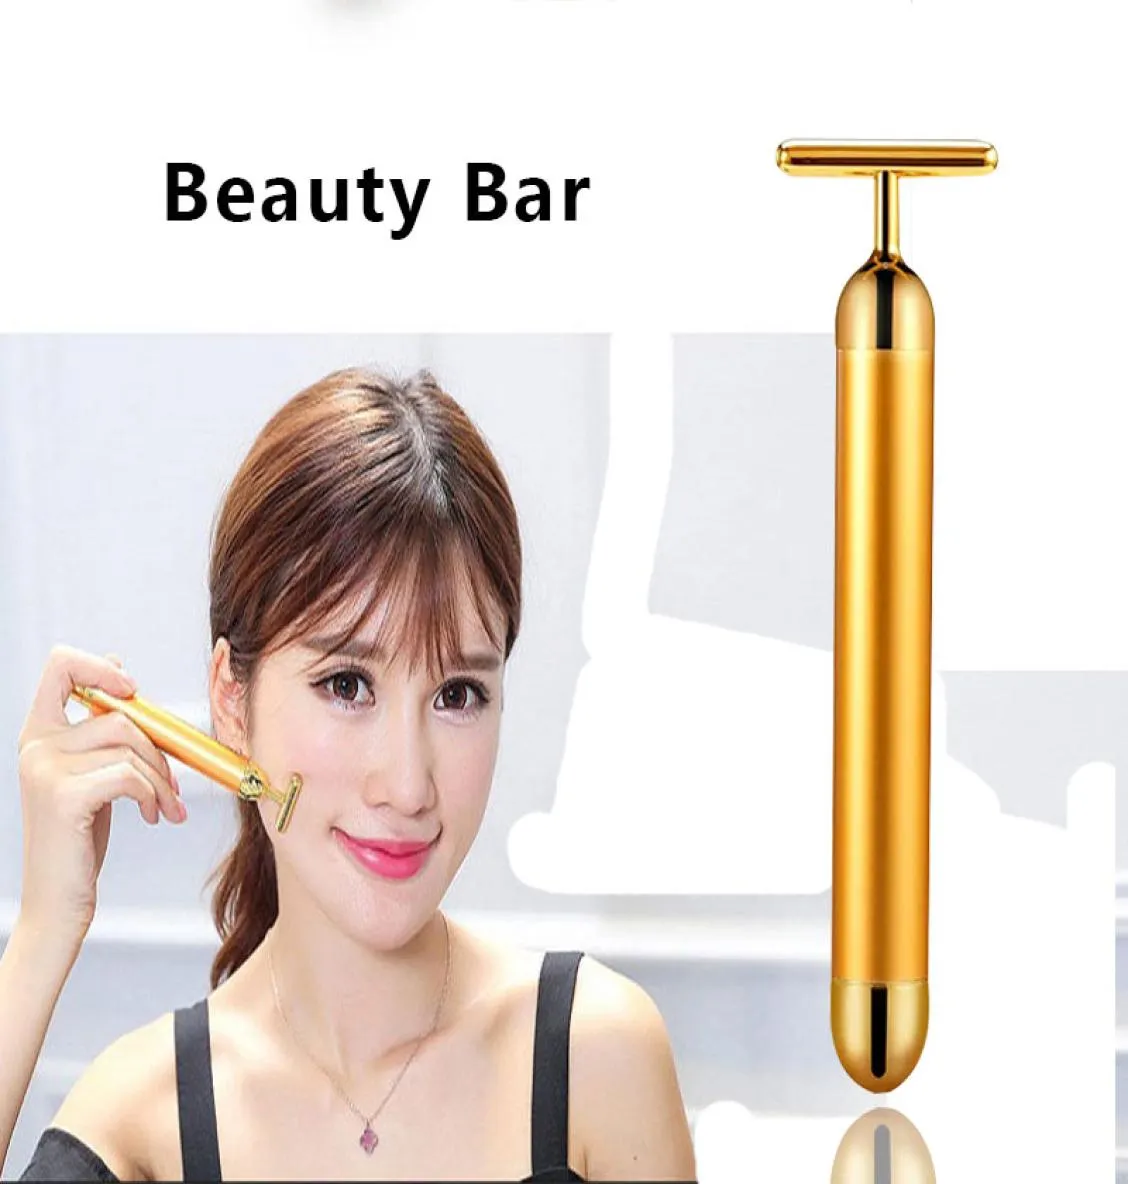 Energy Beauty Bar Vibrating Facial Slimming Face Massager Pulse Firming Stick Lift Skin Tightening Anti Aging Wrinkle Tool1326716